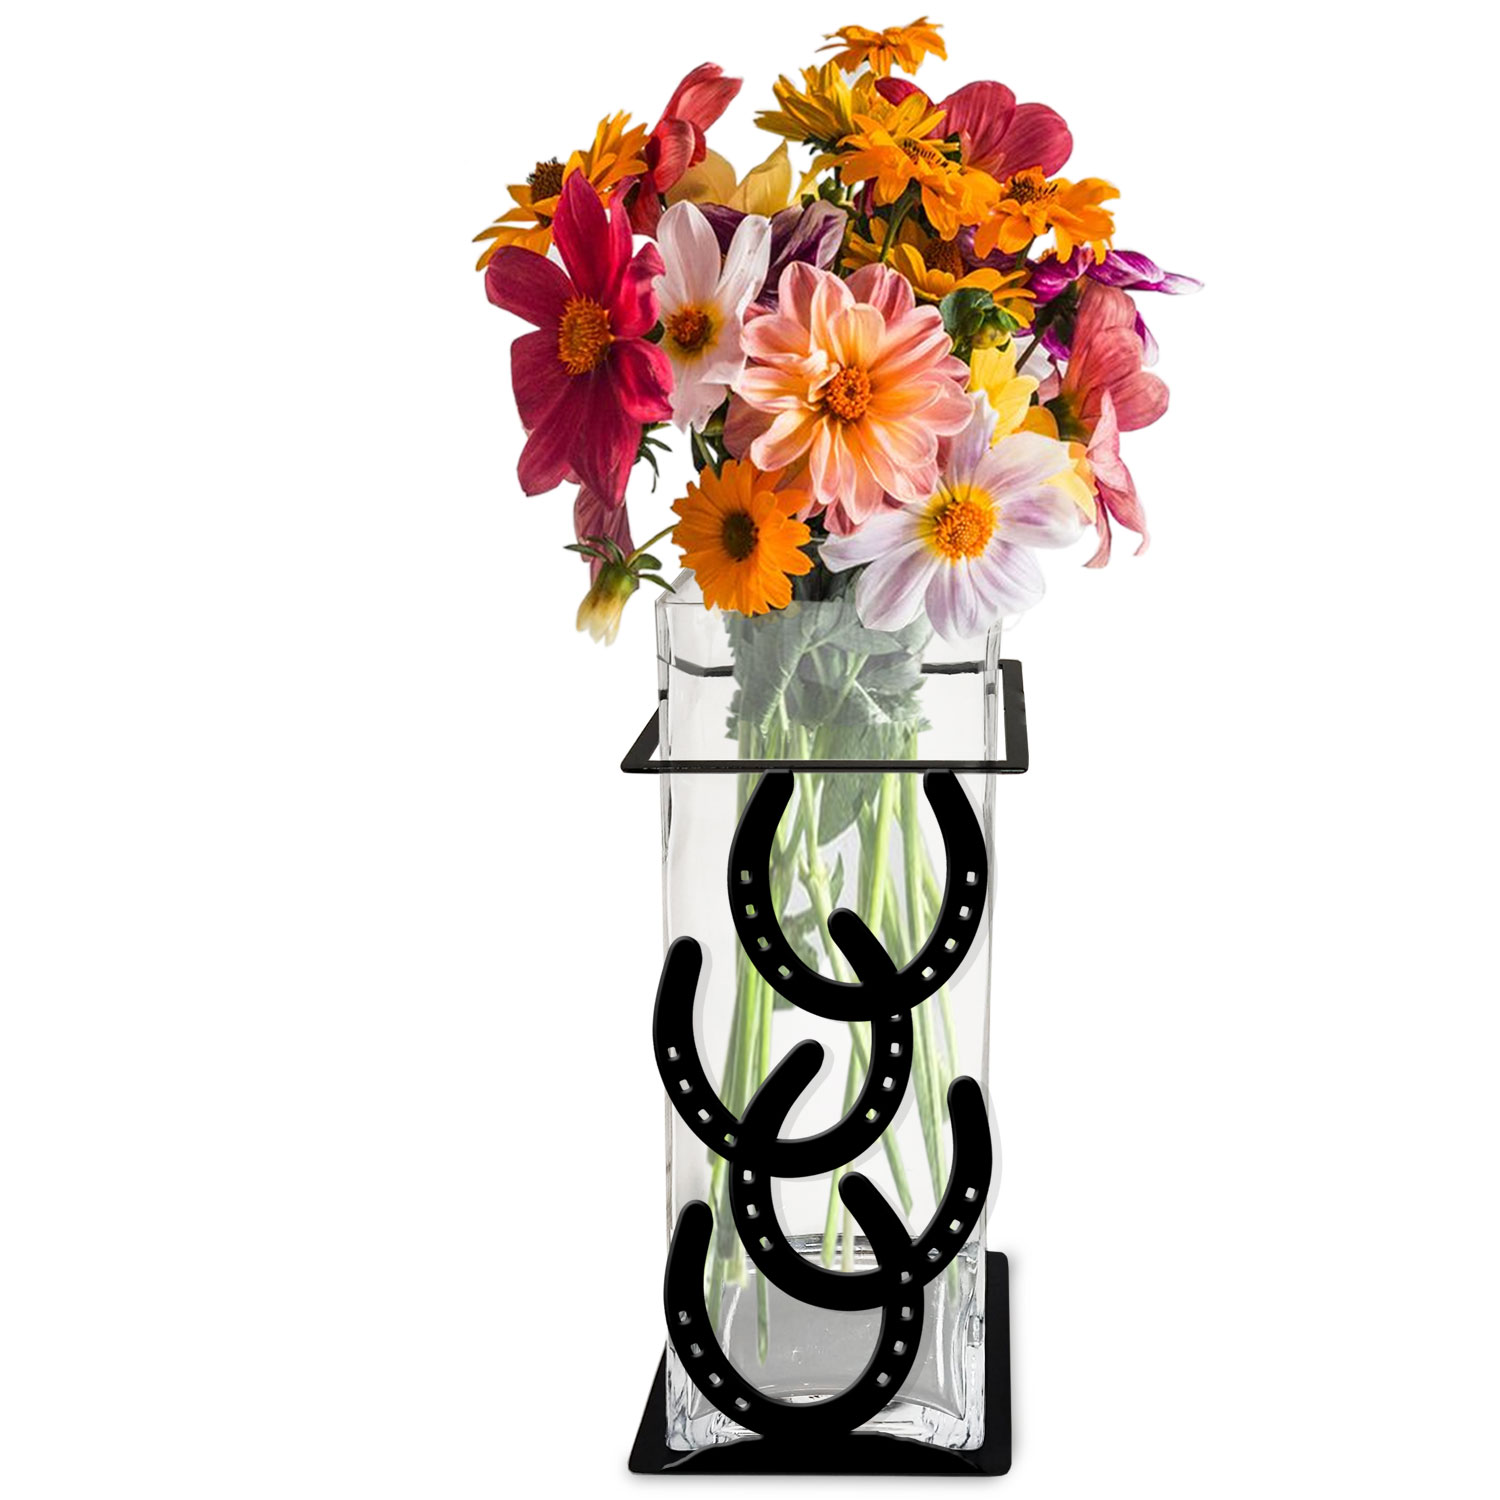 621510 - Horseshoes 12in Tall Metal and Glass Square Vase